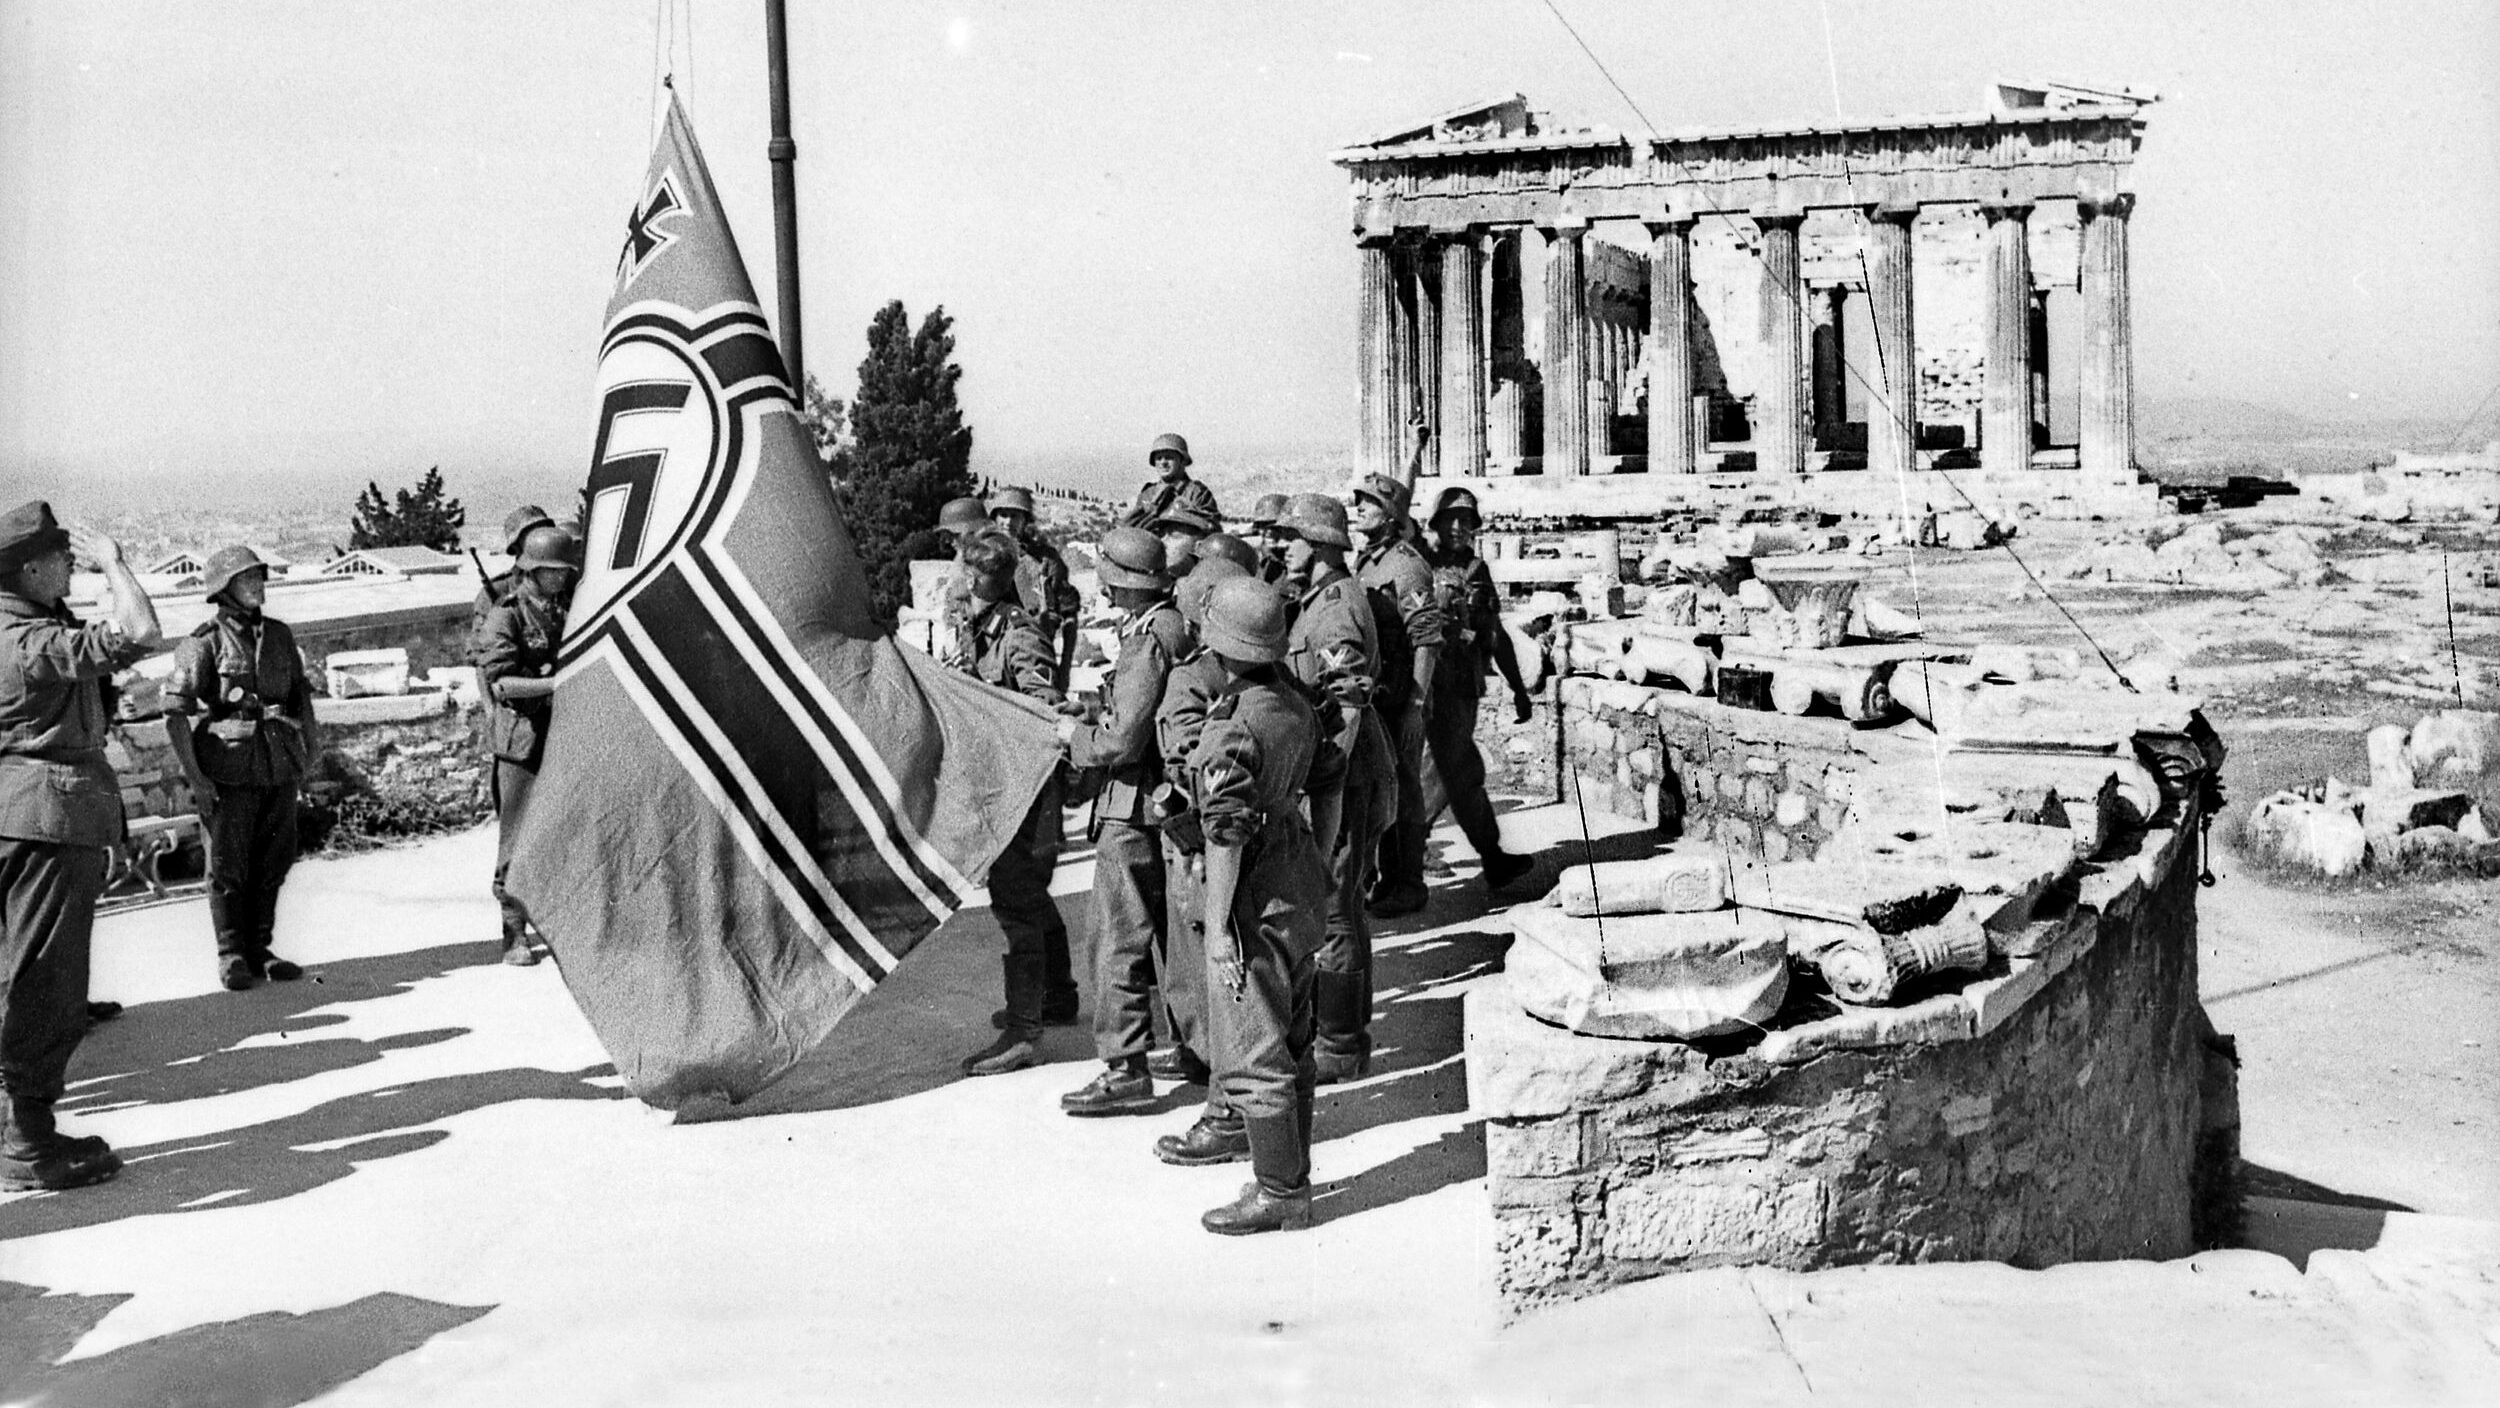 After having failed to conquer his long-time rival Greece, Italian dictator Benito Mussolini asked Axis partner Adolf Hitler for help. Here, German soldiers raise the German war banner atop the Acropolis in Athens after forcing the Greeks to surrender on April 27, 1941. Terrible atrocities by the Germans against the Greek populace followed.